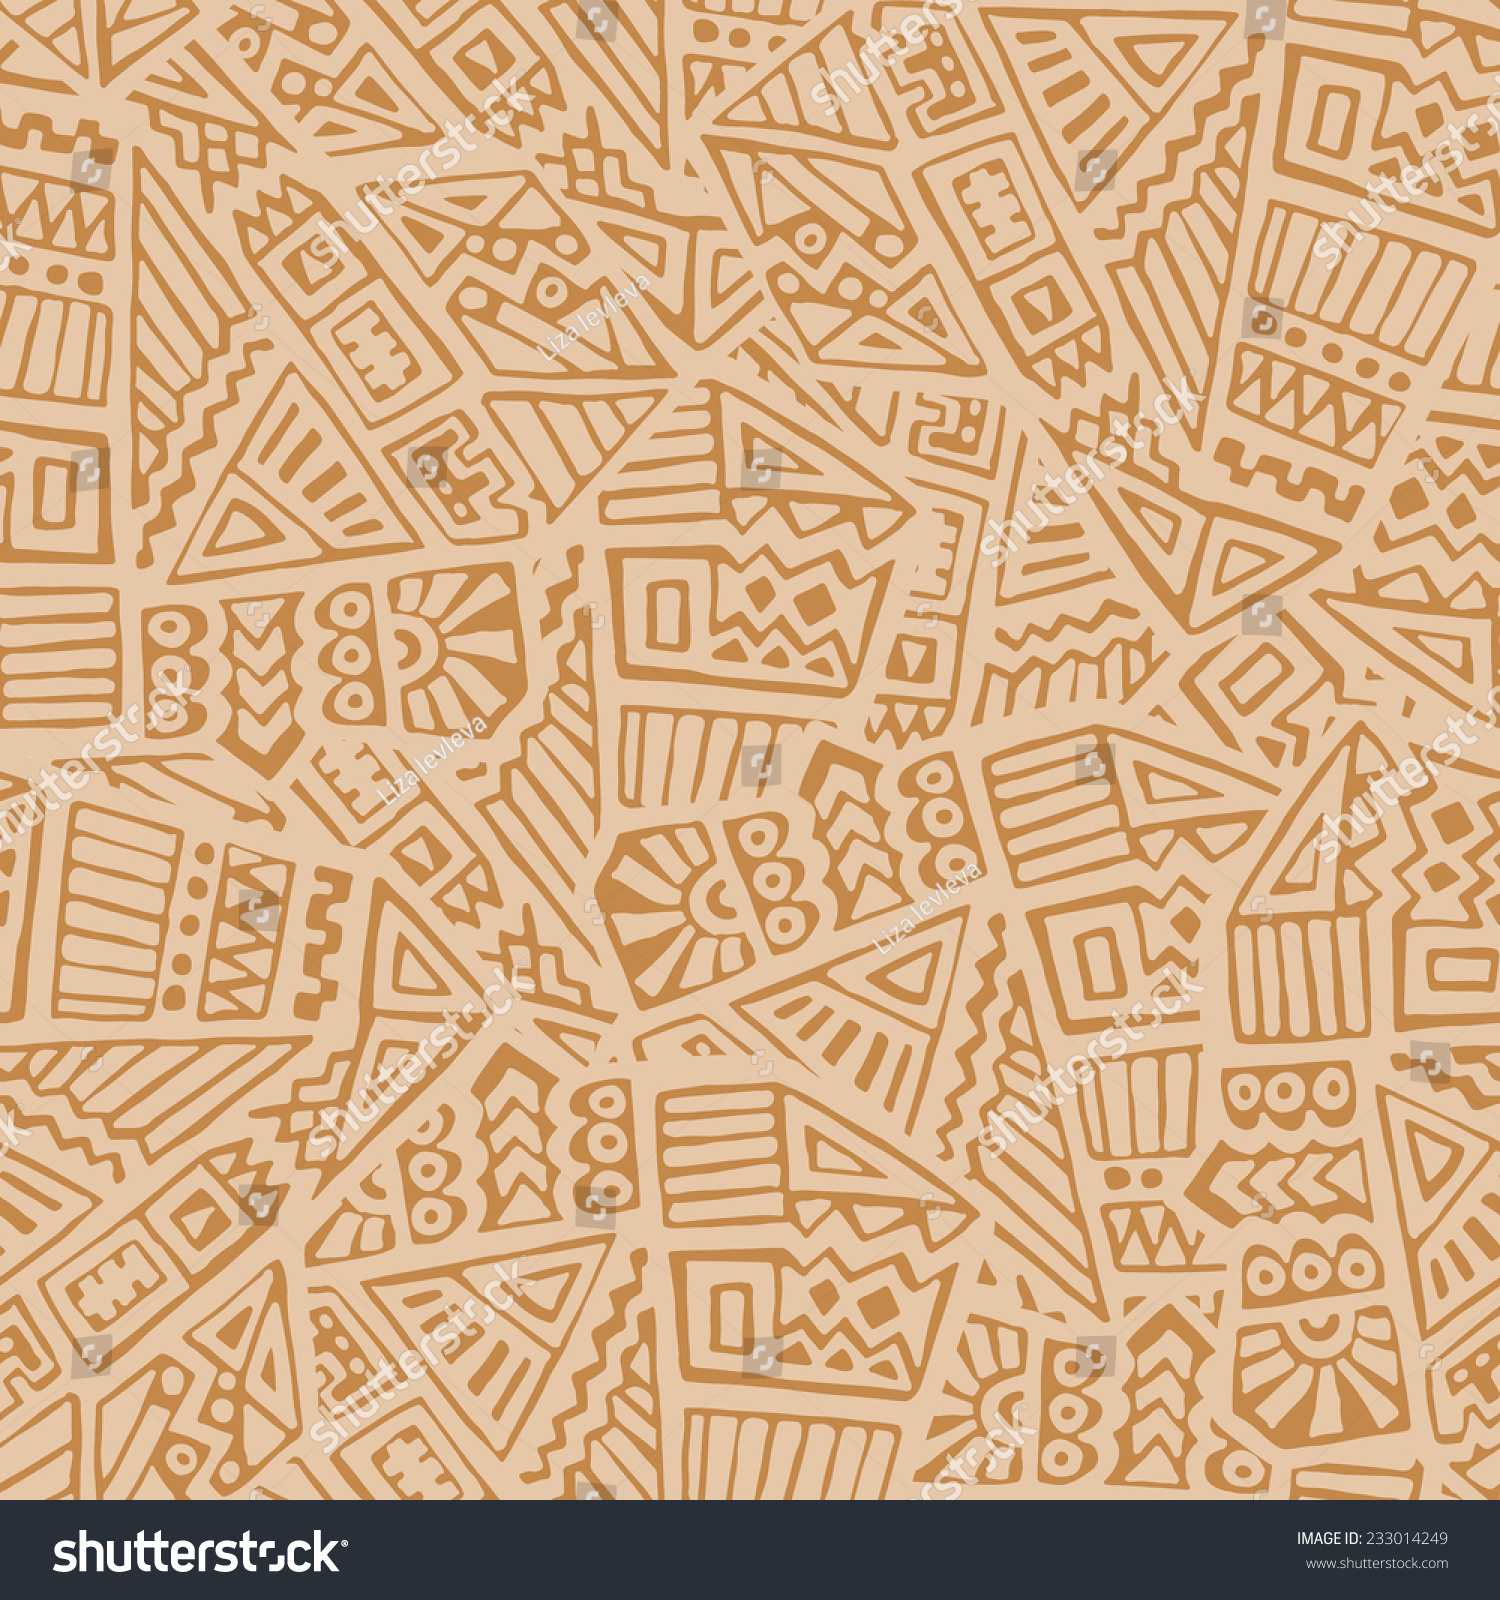 SVG of Hand Drawn Ethnic Seamless Pattern in Tribal Style svg